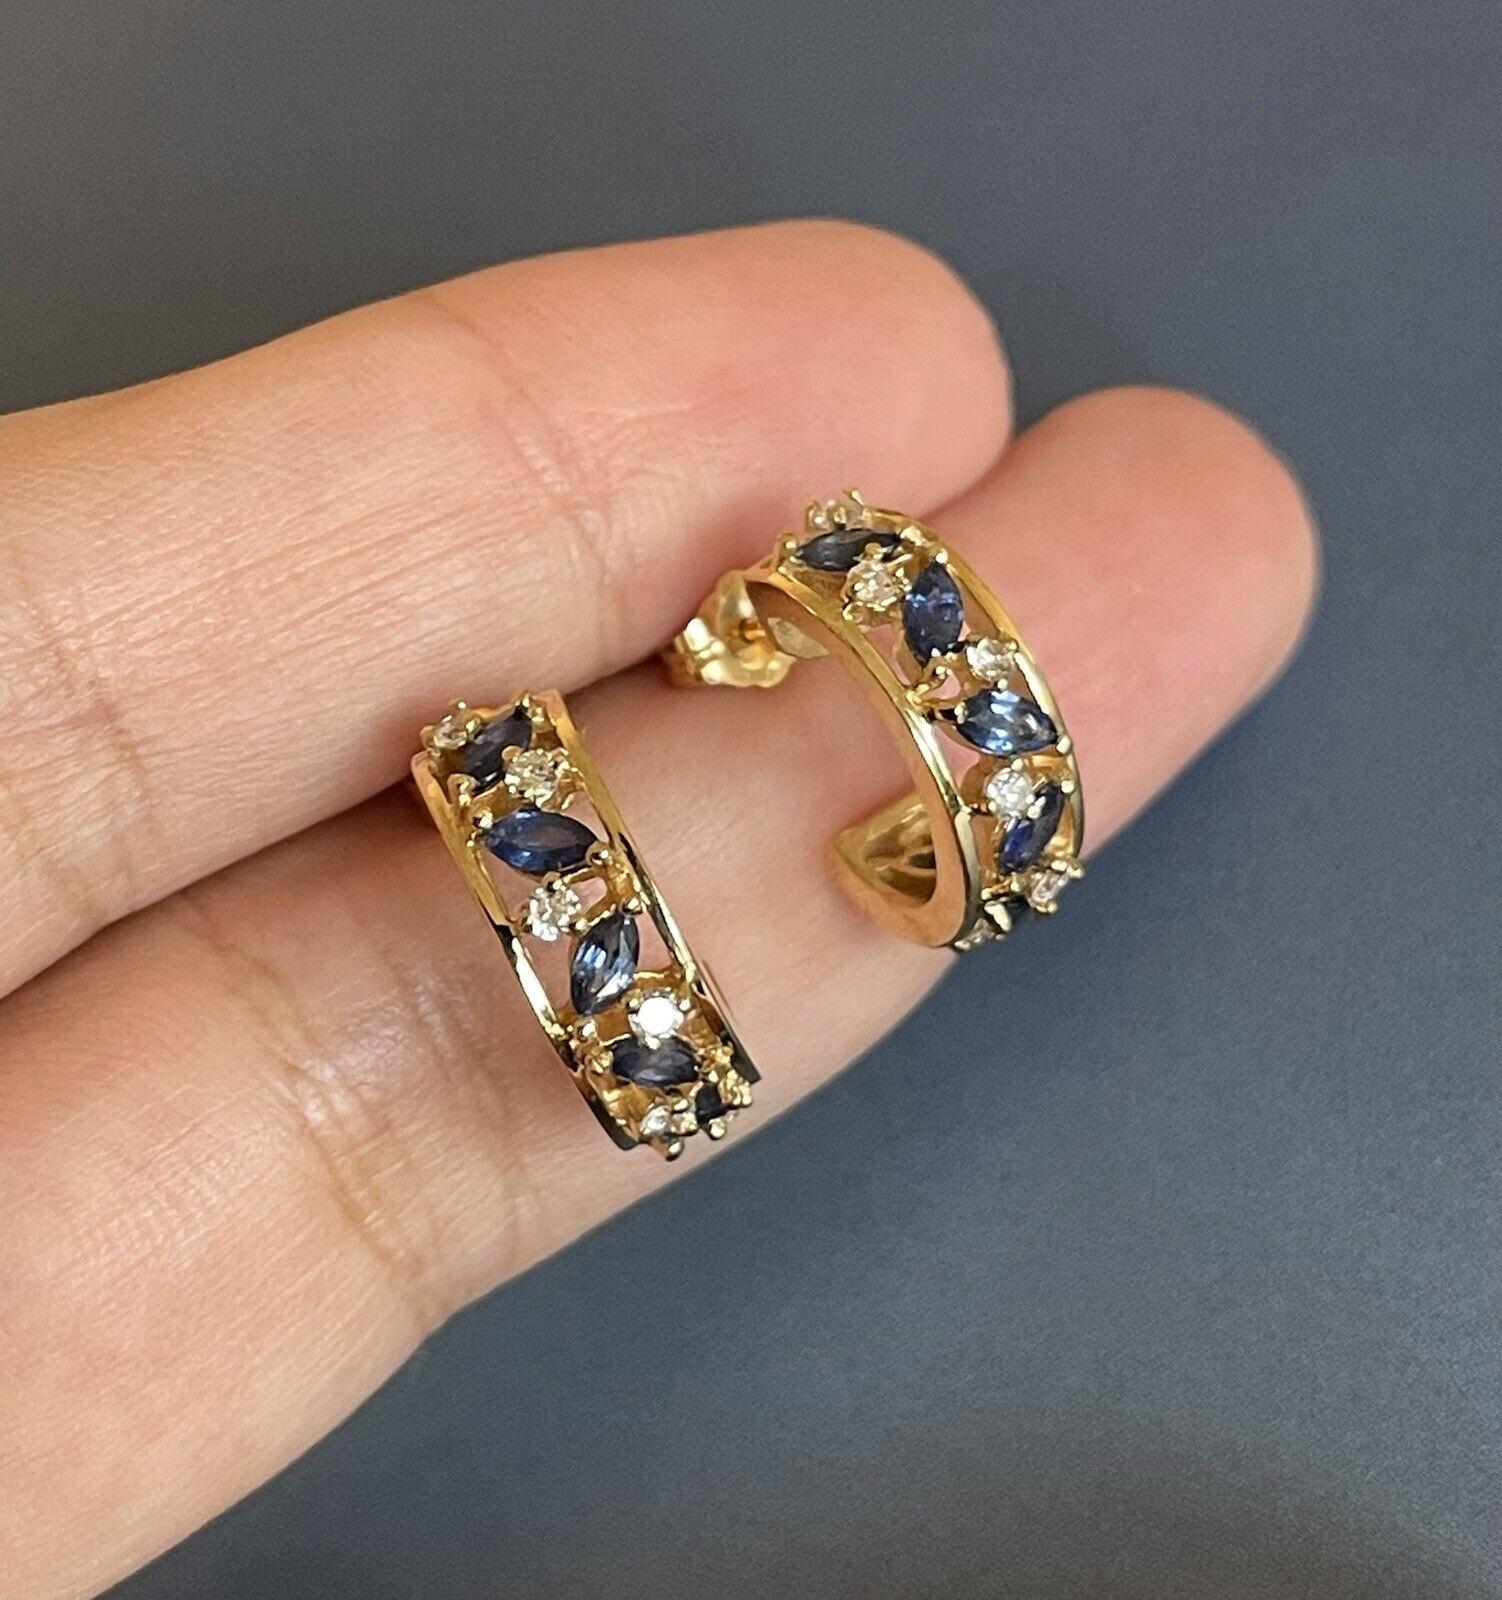 18ct Yellow Gold Solitaire Diamond Sapphire Earrings 6g Half Hoop Studs Hoops In New Condition For Sale In Ilford, GB